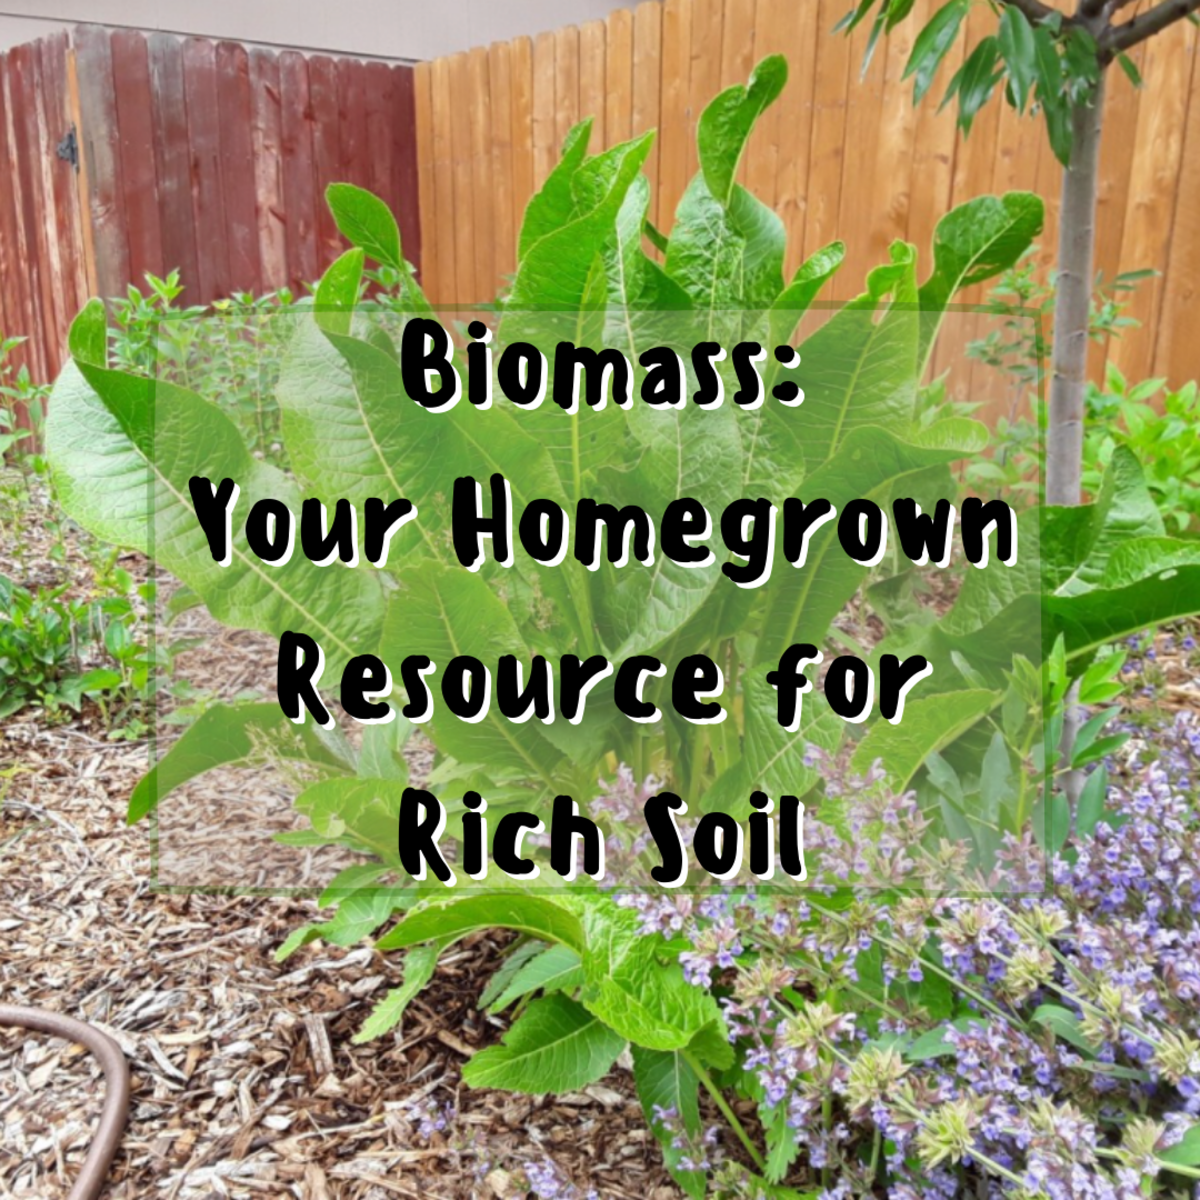 Learn about the best plants for biomass, which is the organic matter that becomes soil. Horseradish (pictured above) is a deep-rooted, easy-to-grow mineral accumulator.